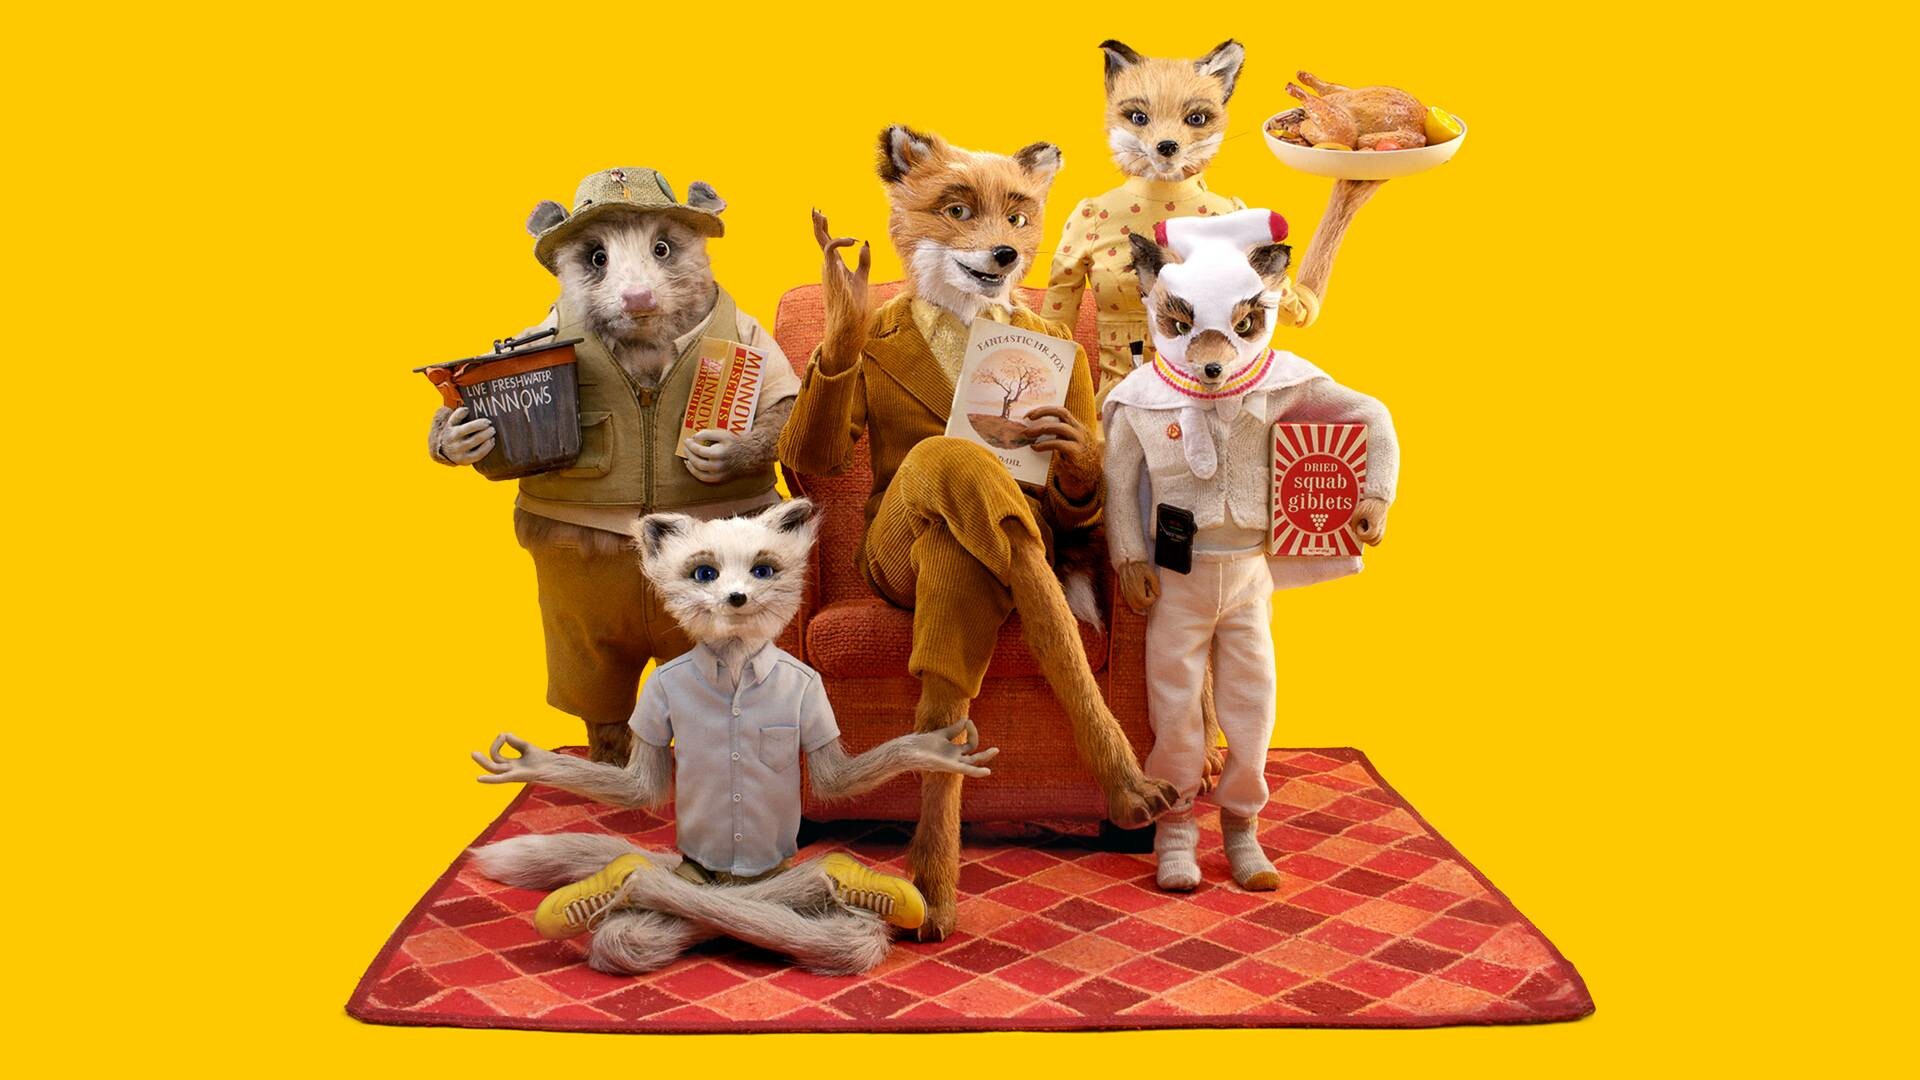 Fantastic Mr. Fox wallpaper, Quirky charm, Stop-motion animation, Wes Anderson's genius, 1920x1080 Full HD Desktop